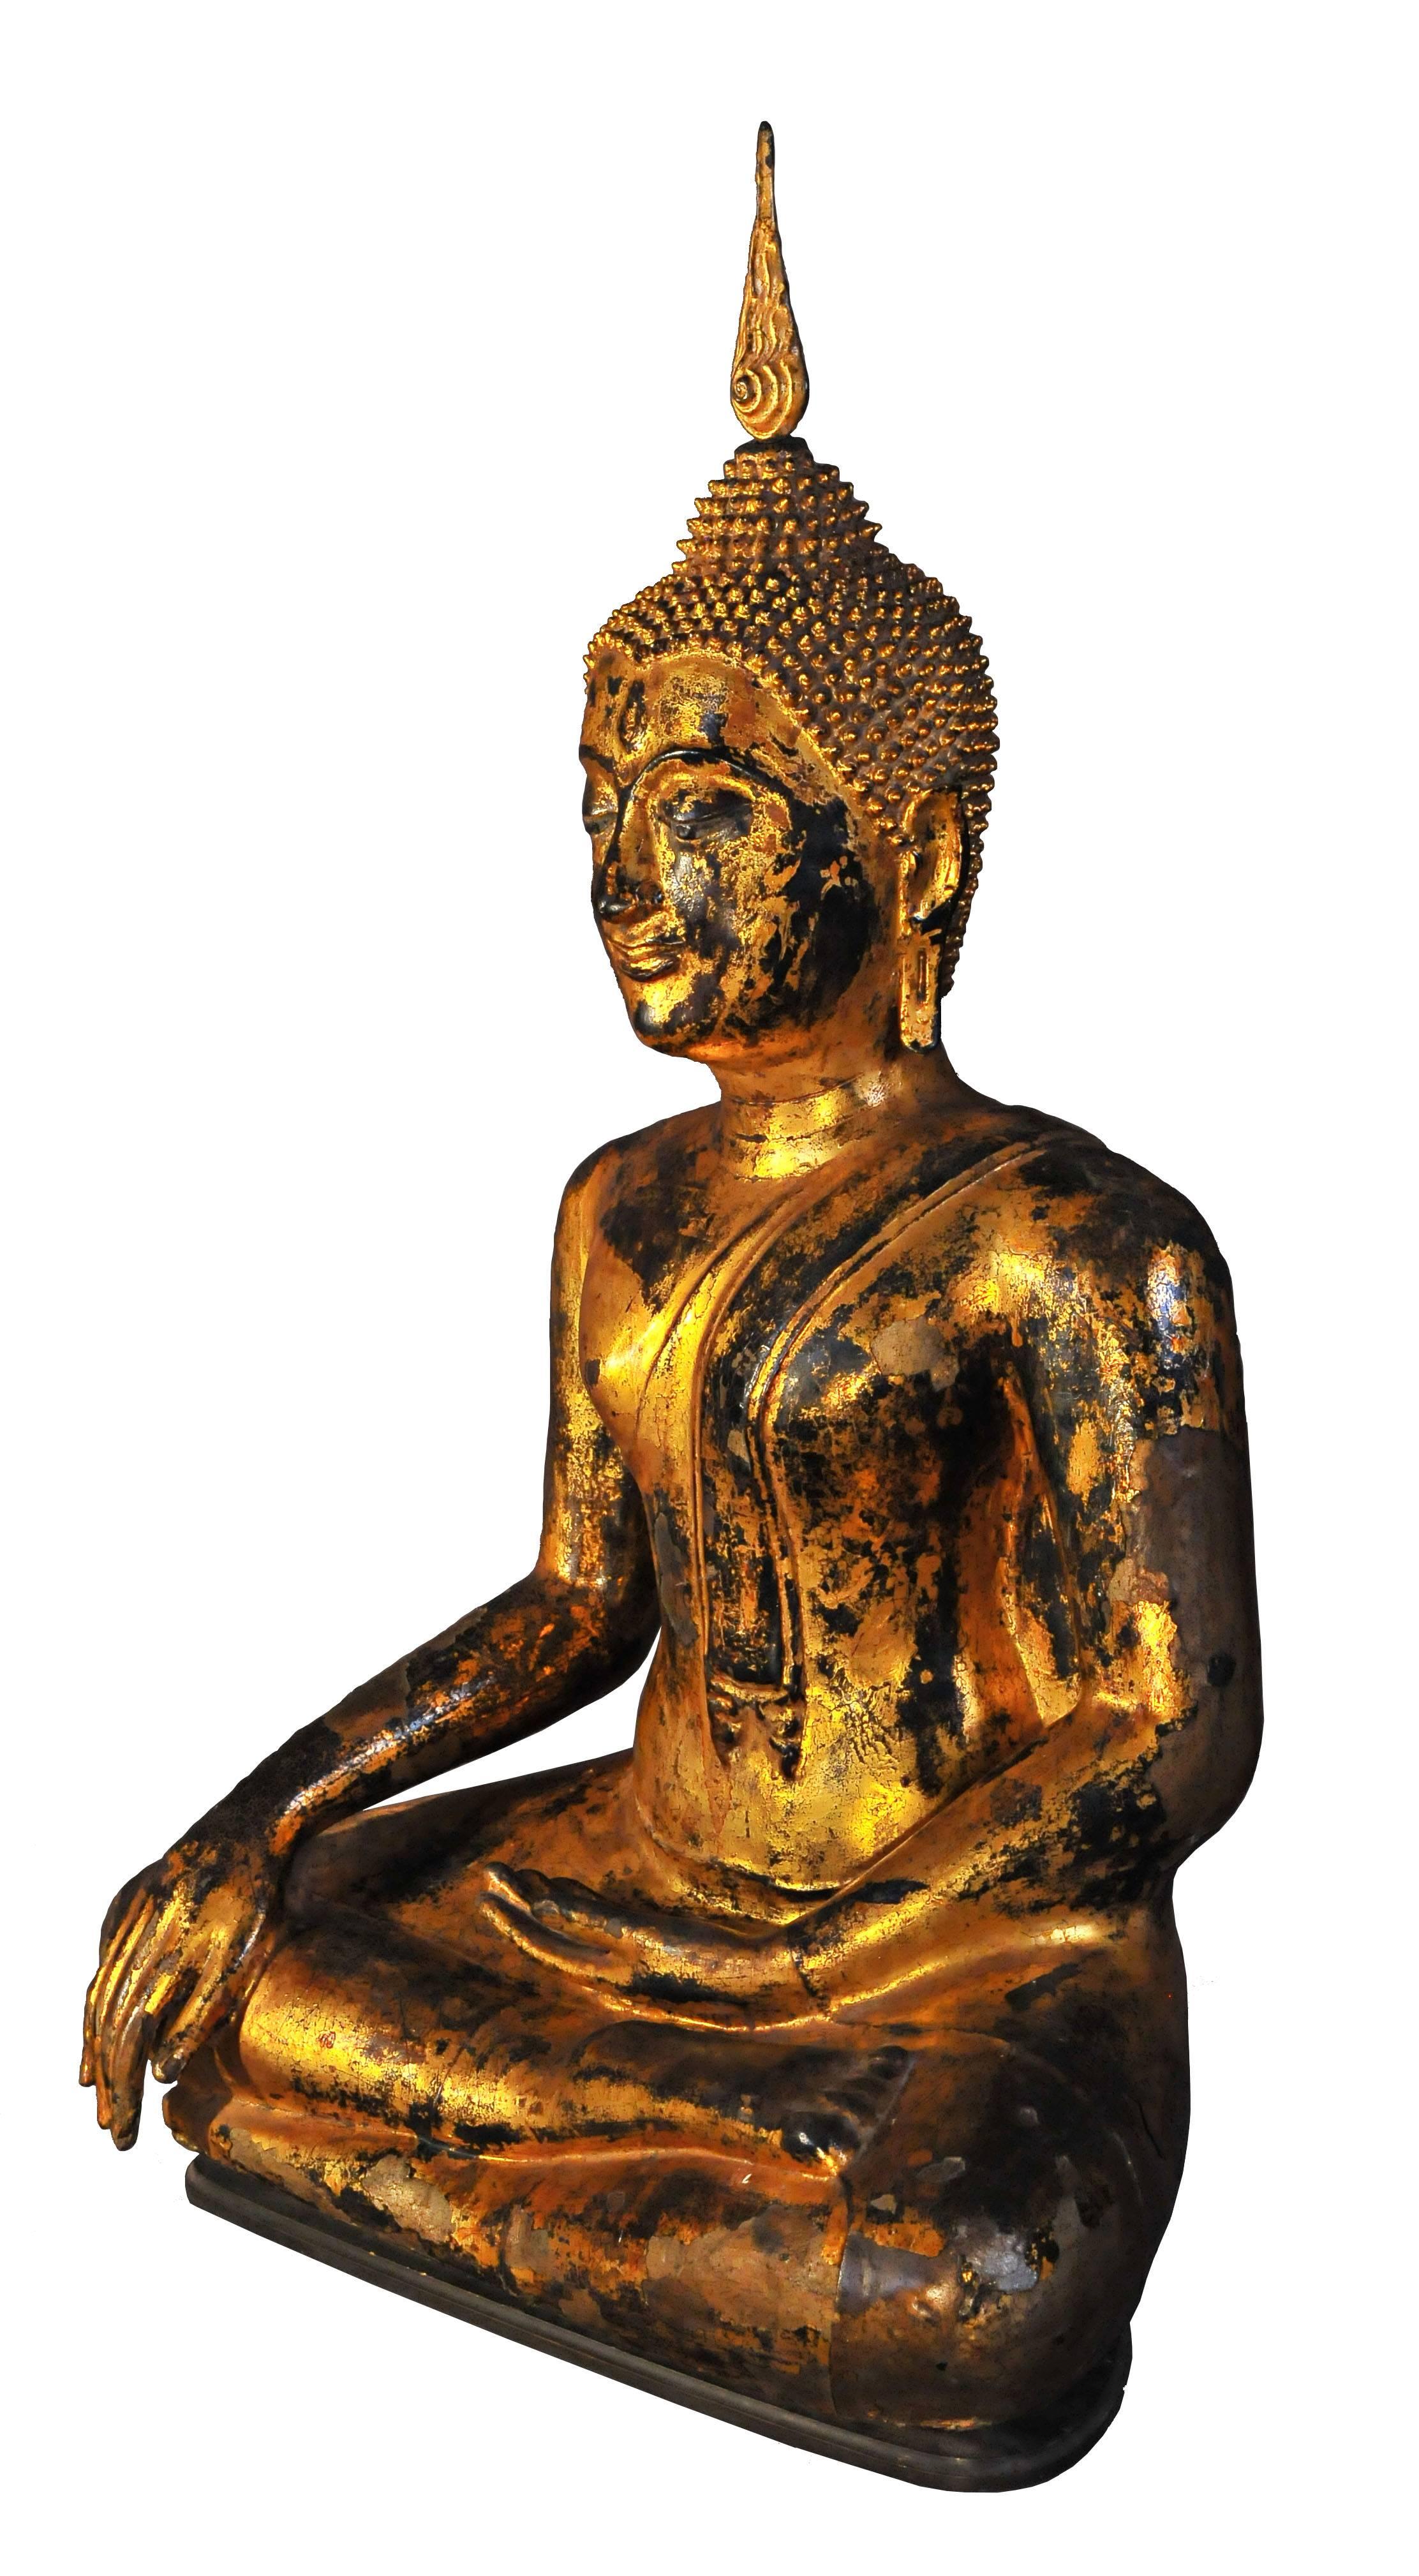 The founding of the kingdom of Ayuthya by the Prince of U Thong in 1350 also marks the birth of a unified Thailand.

The Master is seated in "virasana", his right leg folded over the other, in the attitude of "Taking the Earth to